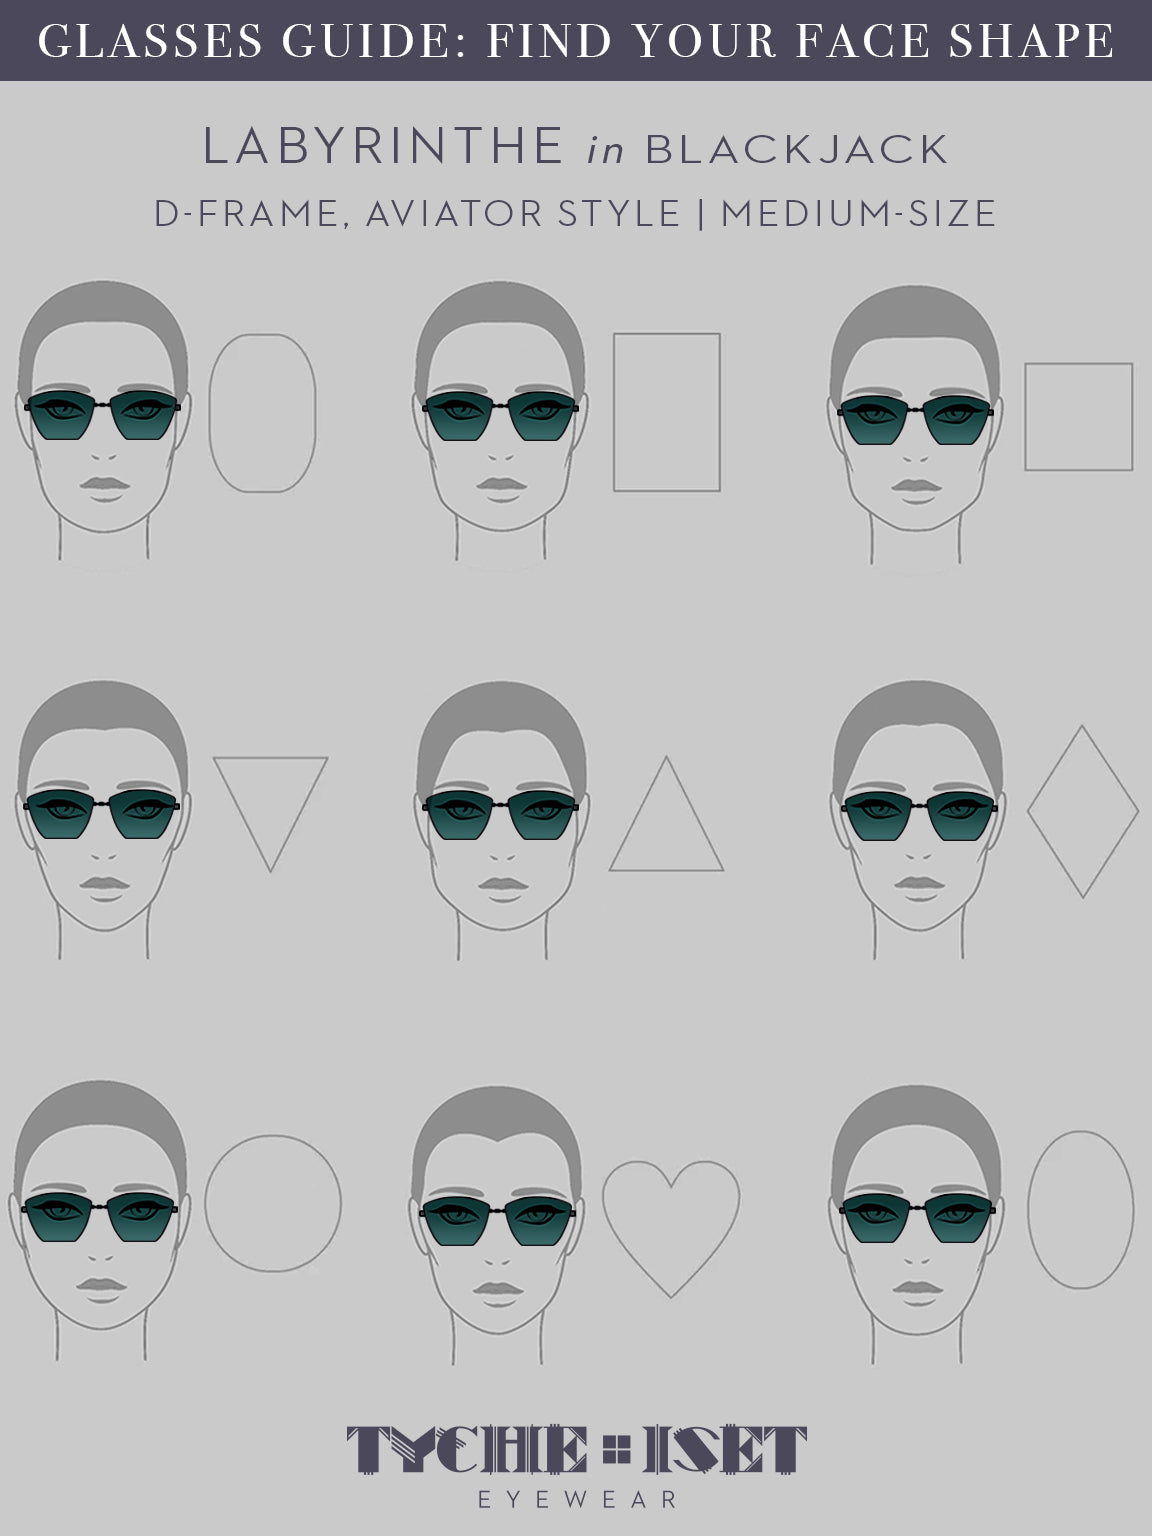 FACE SHAPE SUNGLASSES GUIDE, EYEWEAR FACE SHAPE GUIDE, Lightweight titanium glasses, strong titanium sunglasses, sunglasses & optical, luxury eyewear, mazzucchelli italian acetate, made in japan, mythology, eyewear designer, woman owned small business, summer accessories, chic style, celebrity style, aviator glasses, d-frame eyewear, cat eye sunglasses, art deco, geometric art, black glasses